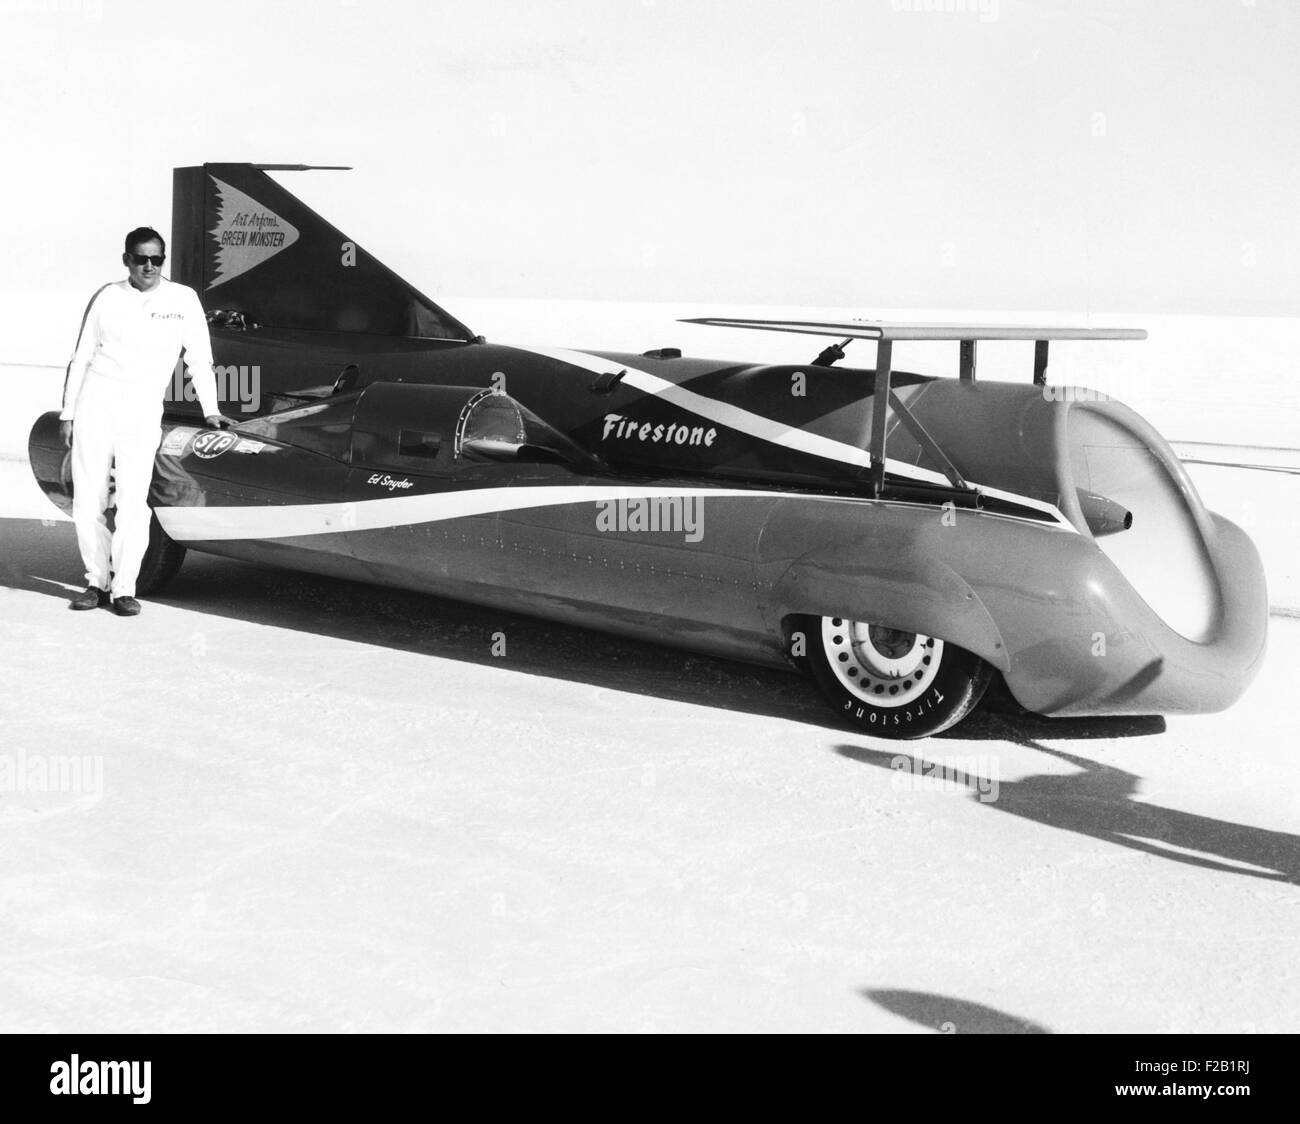 Art Arfons on the Bonneville Salt Flats with his 'Green Monster' jet car. He would set three world land speed records between 1964 and 1965. (CSU 2015 7 422) Stock Photo